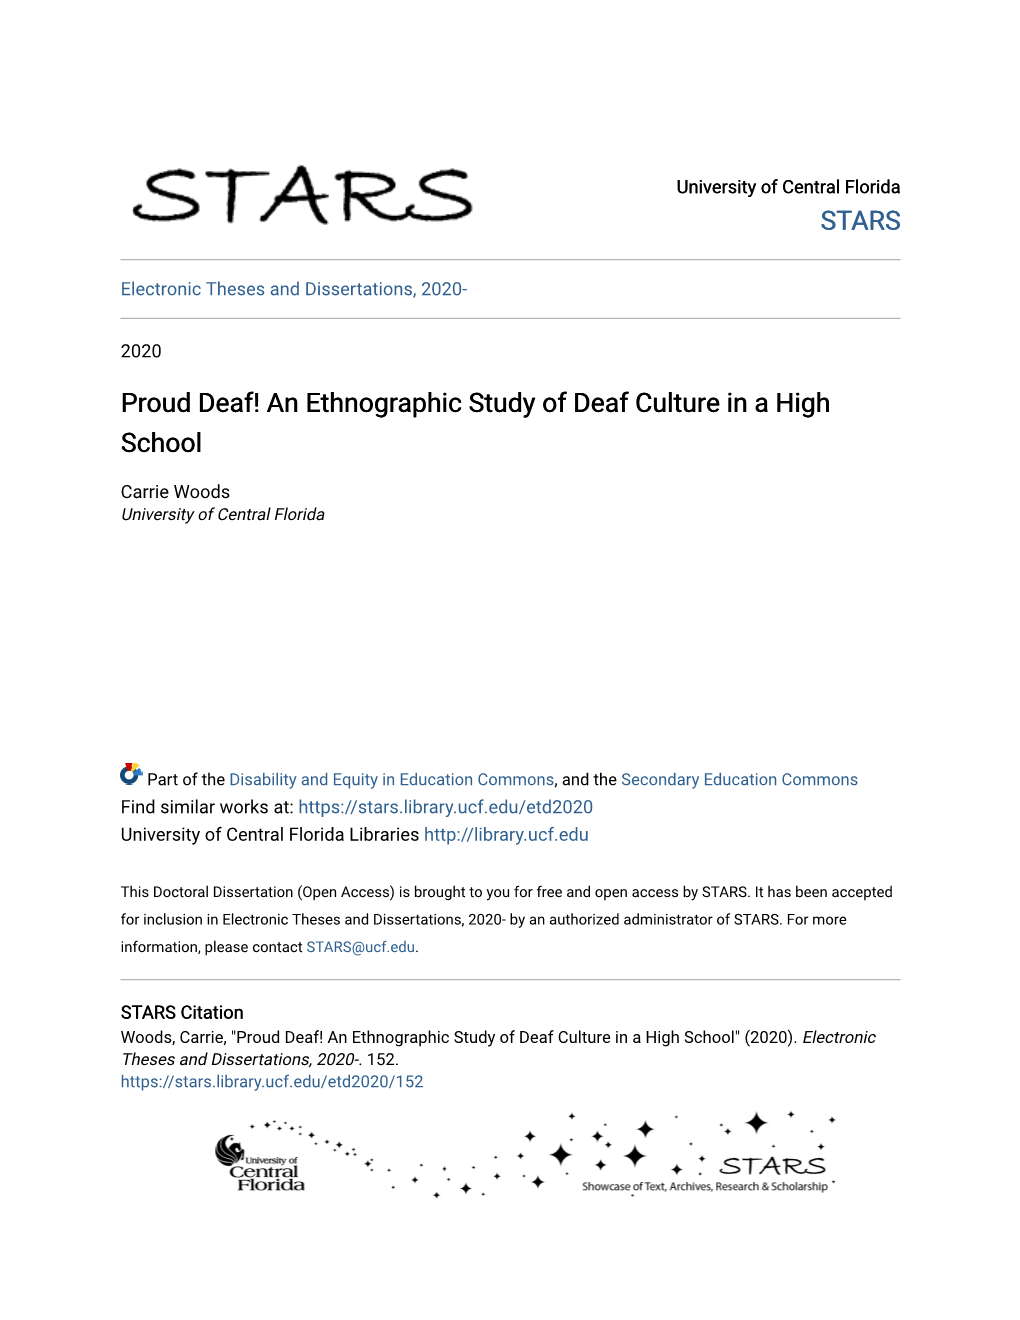 Proud Deaf! an Ethnographic Study of Deaf Culture in a High School